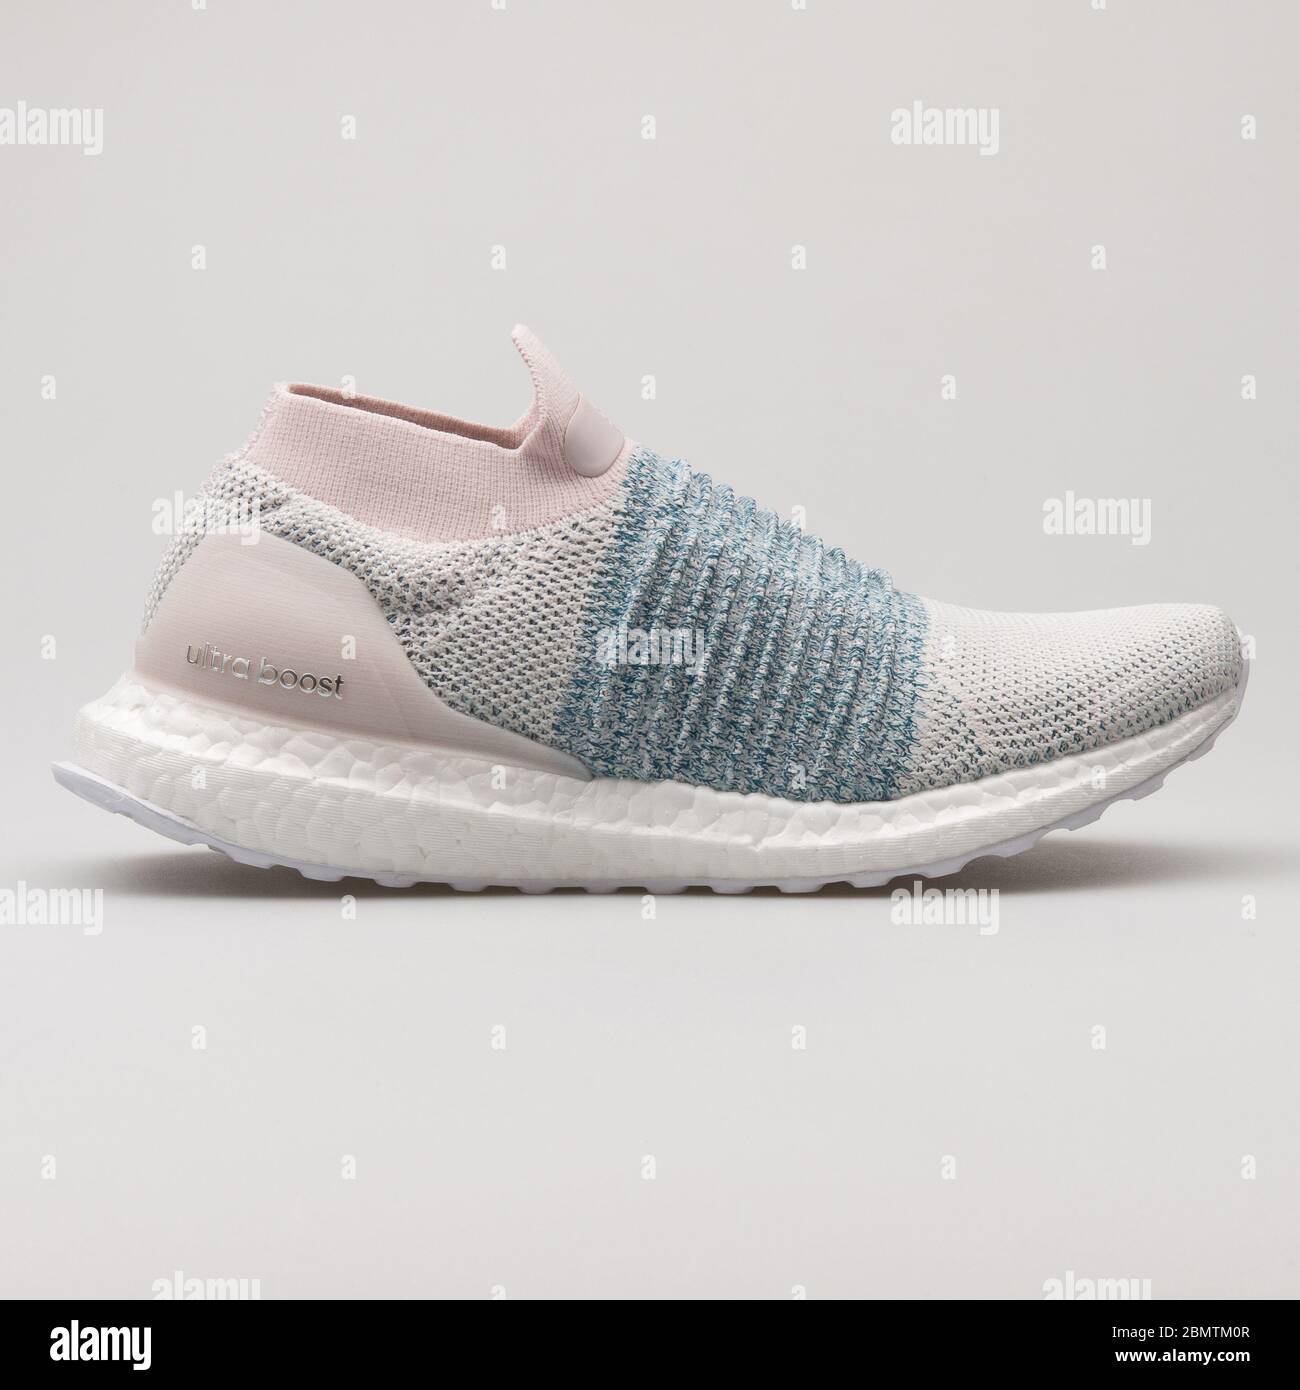 Adidas Ultra Boost High Resolution Stock Photography And Images Alamy